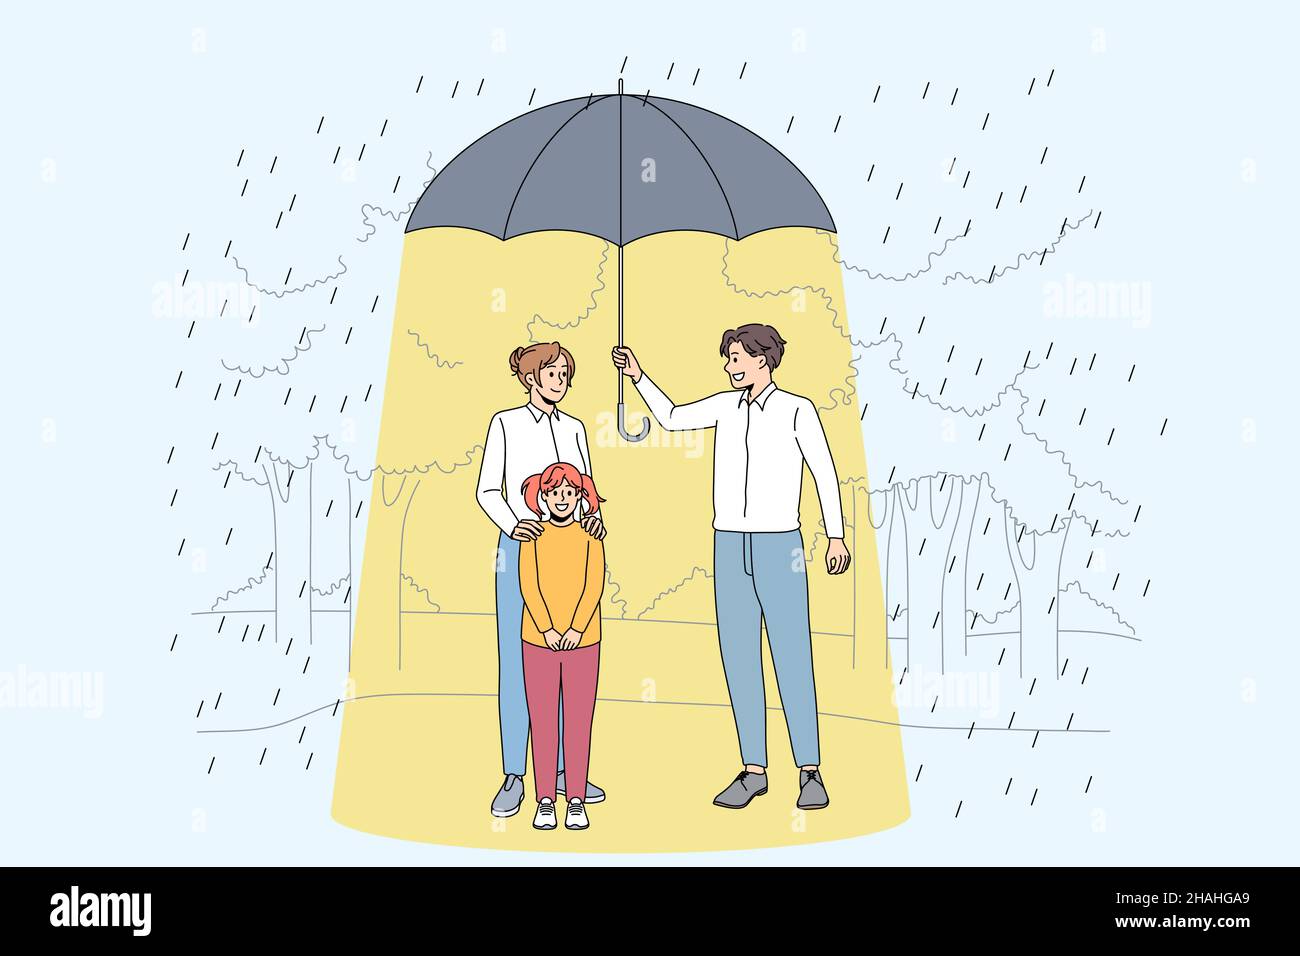 Taking care and support concept. Young smiling man standing and holding huge umbrella under woman mother and her little daughter on rainy day vector illustration  Stock Vector